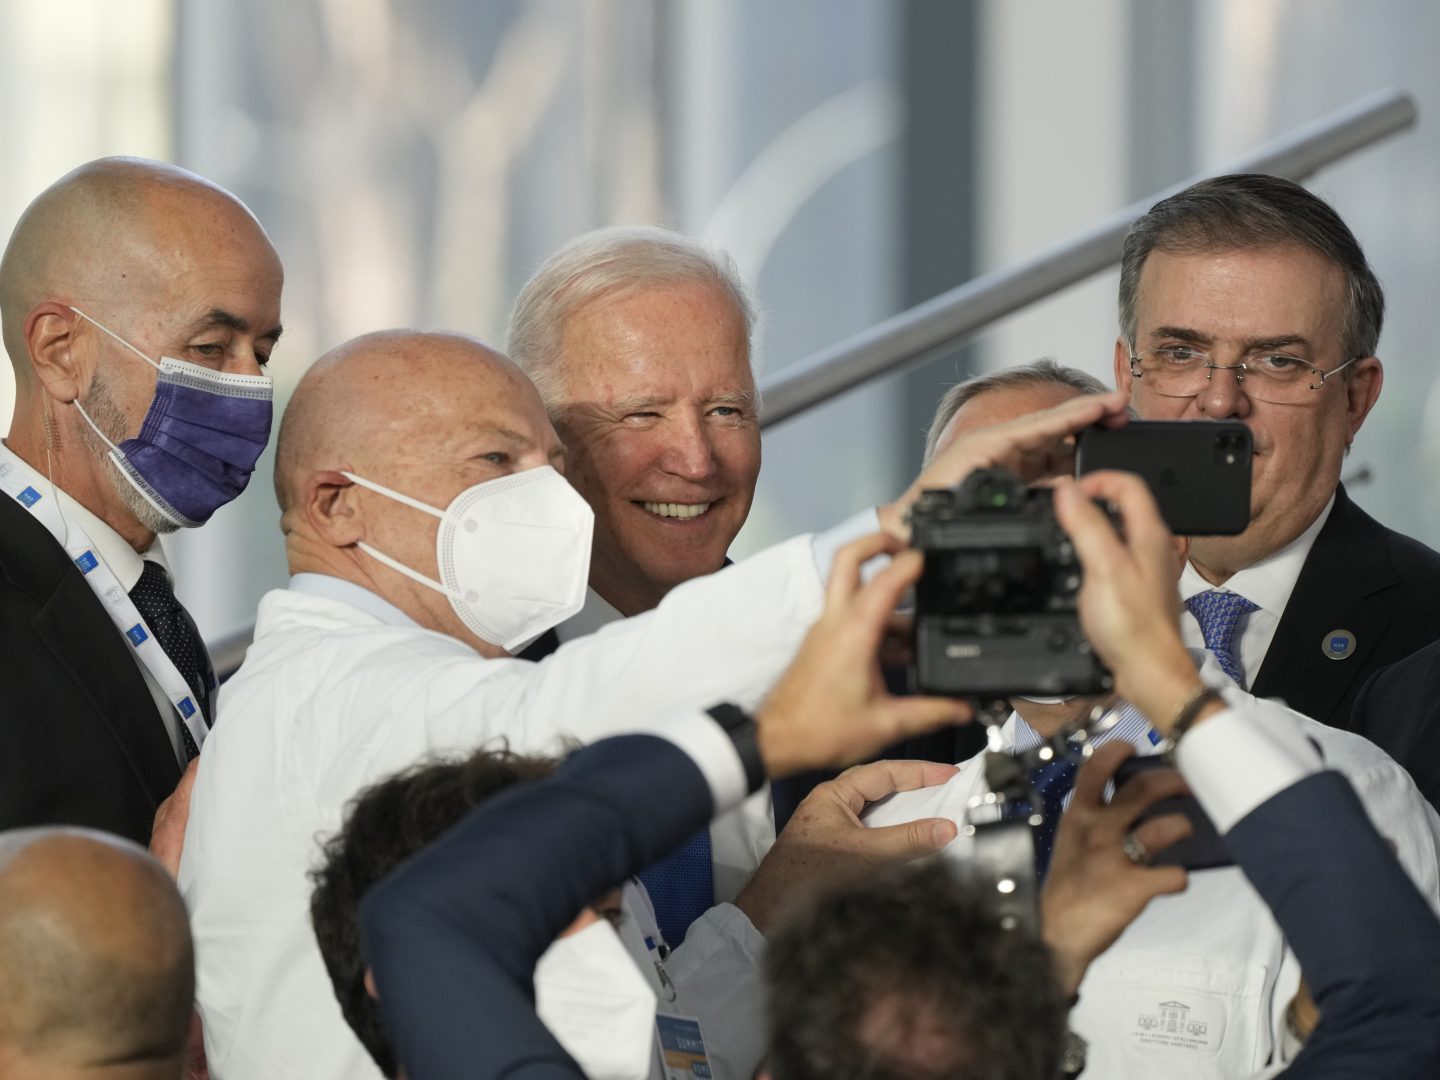 U.S. President Joe Biden poses for a selfie with medical personnel and other world leaders during a group photo at the La Nuvola conference center for the G20 summit in Rome, Saturday, Oct. 30, 2021. The two-day Group of 20 summit is the first in-person gathering of leaders of the world's biggest economies since the COVID-19 pandemic started. (AP Photo/Gregorio Borgia)